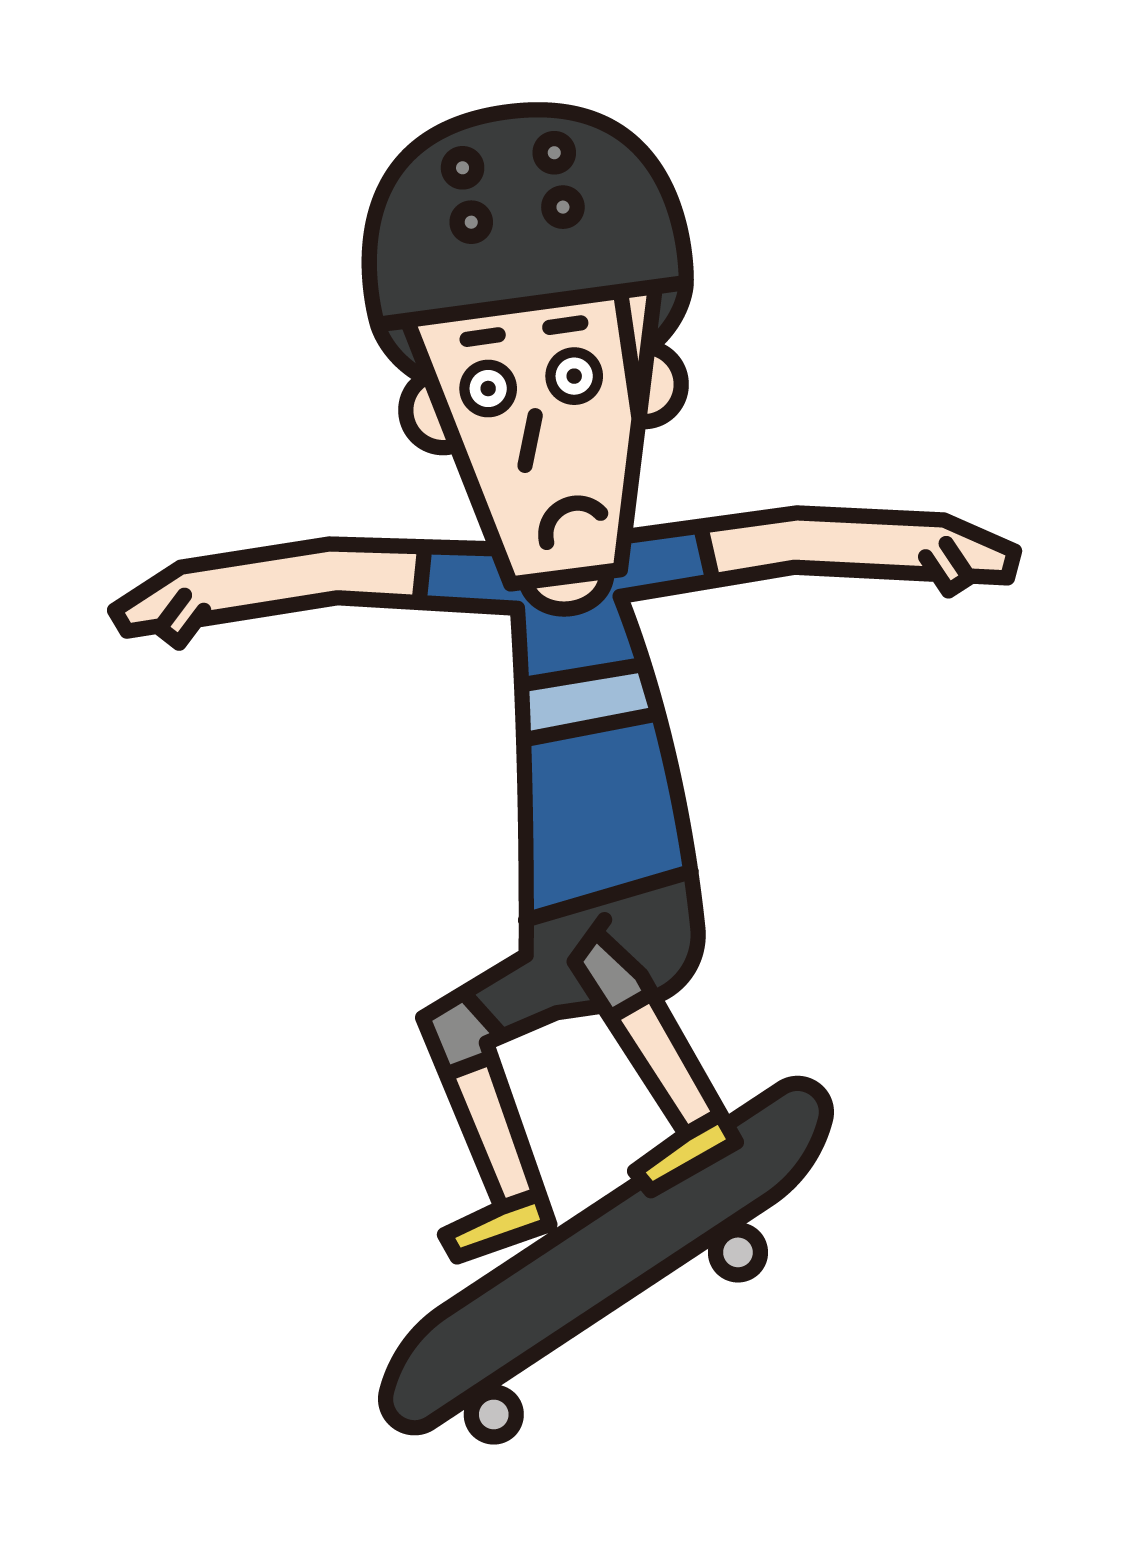 Illustration of a player (male) jumping on a skateboard